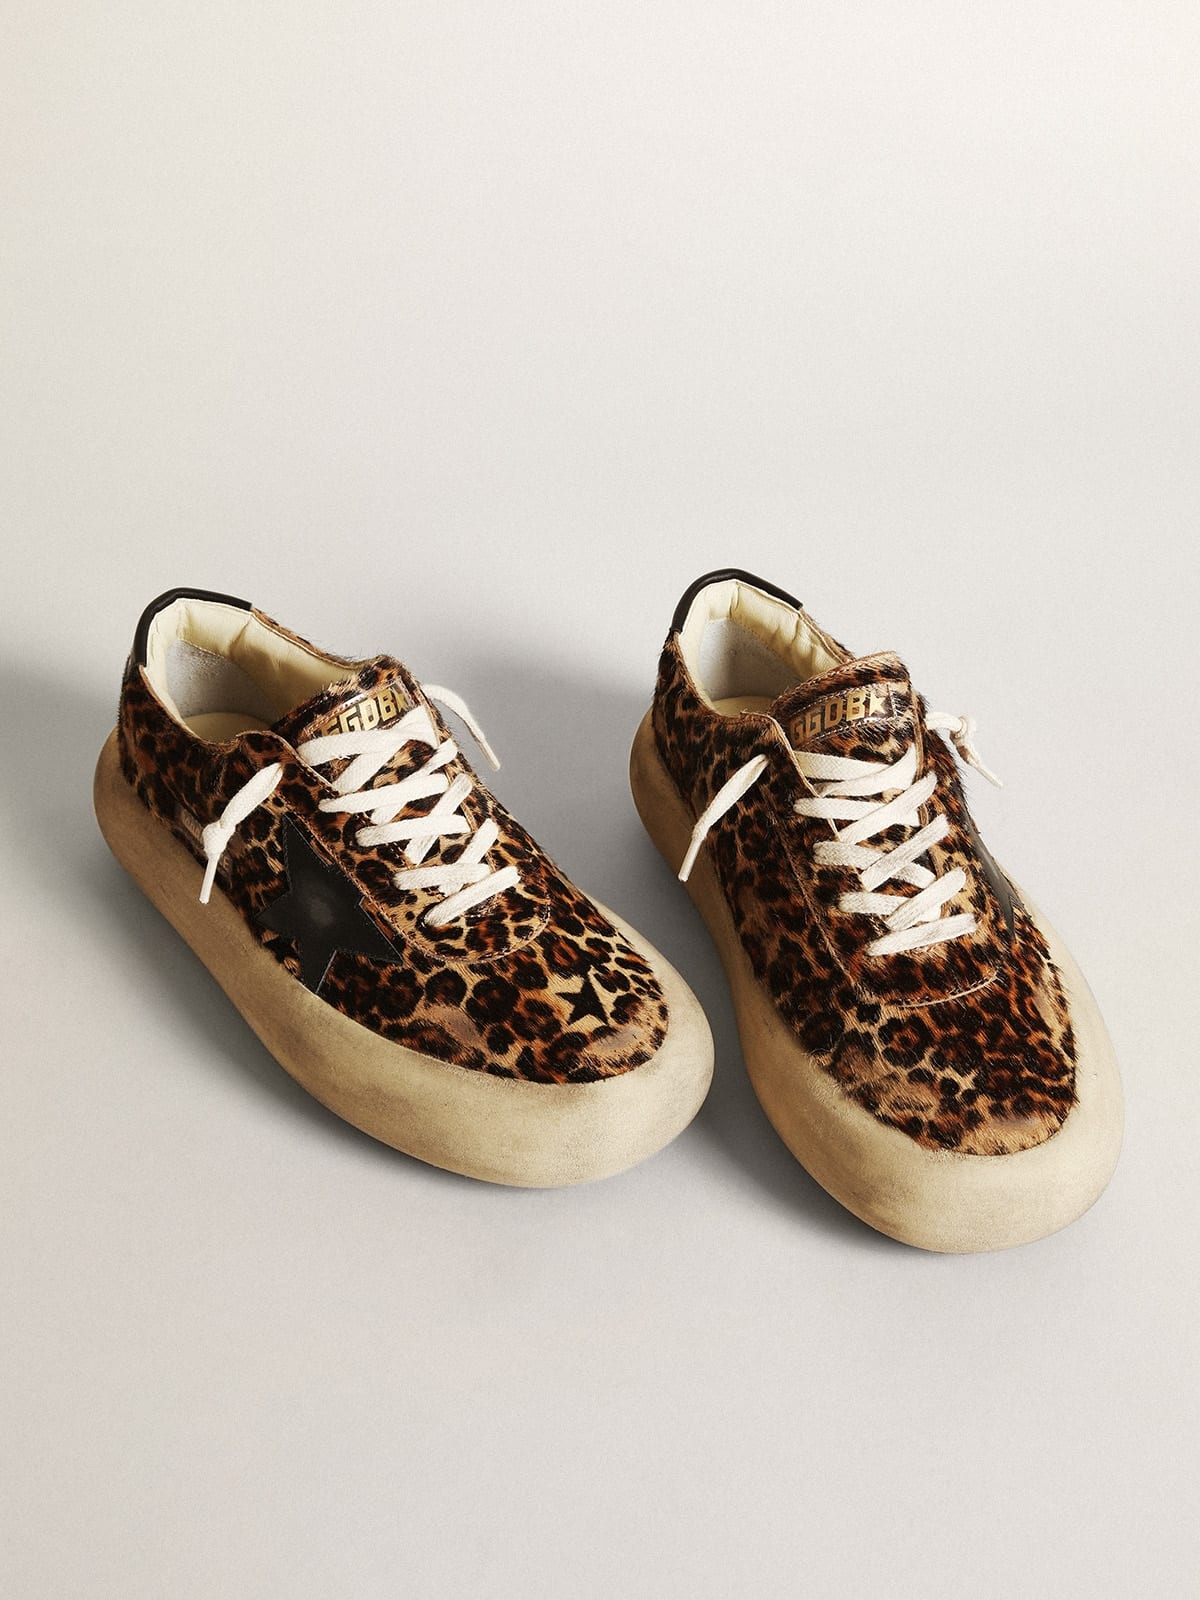 Women's Space-Star shoes in leopard-print pony skin with black leather star and heel tab - 2